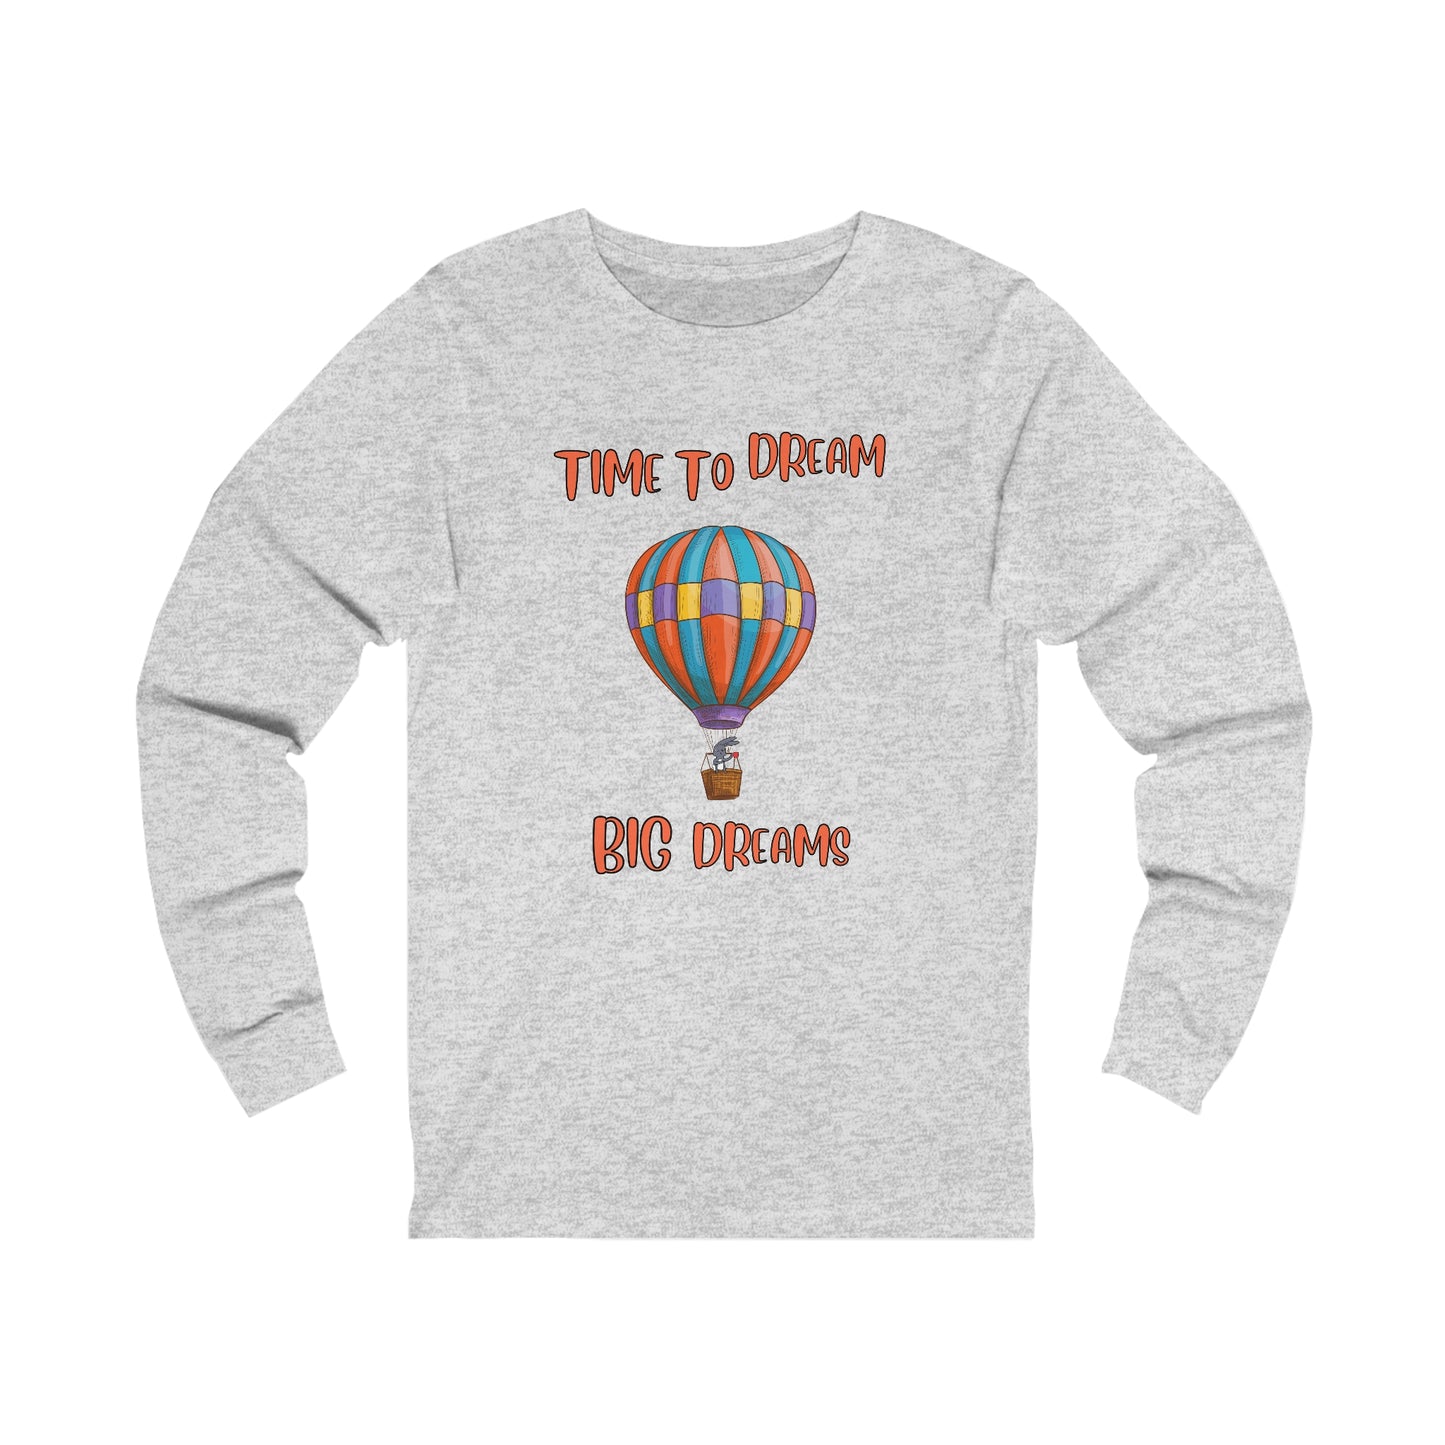 Time To Dream Big Dreams. Unisex Jersey Long Sleeve Tee.